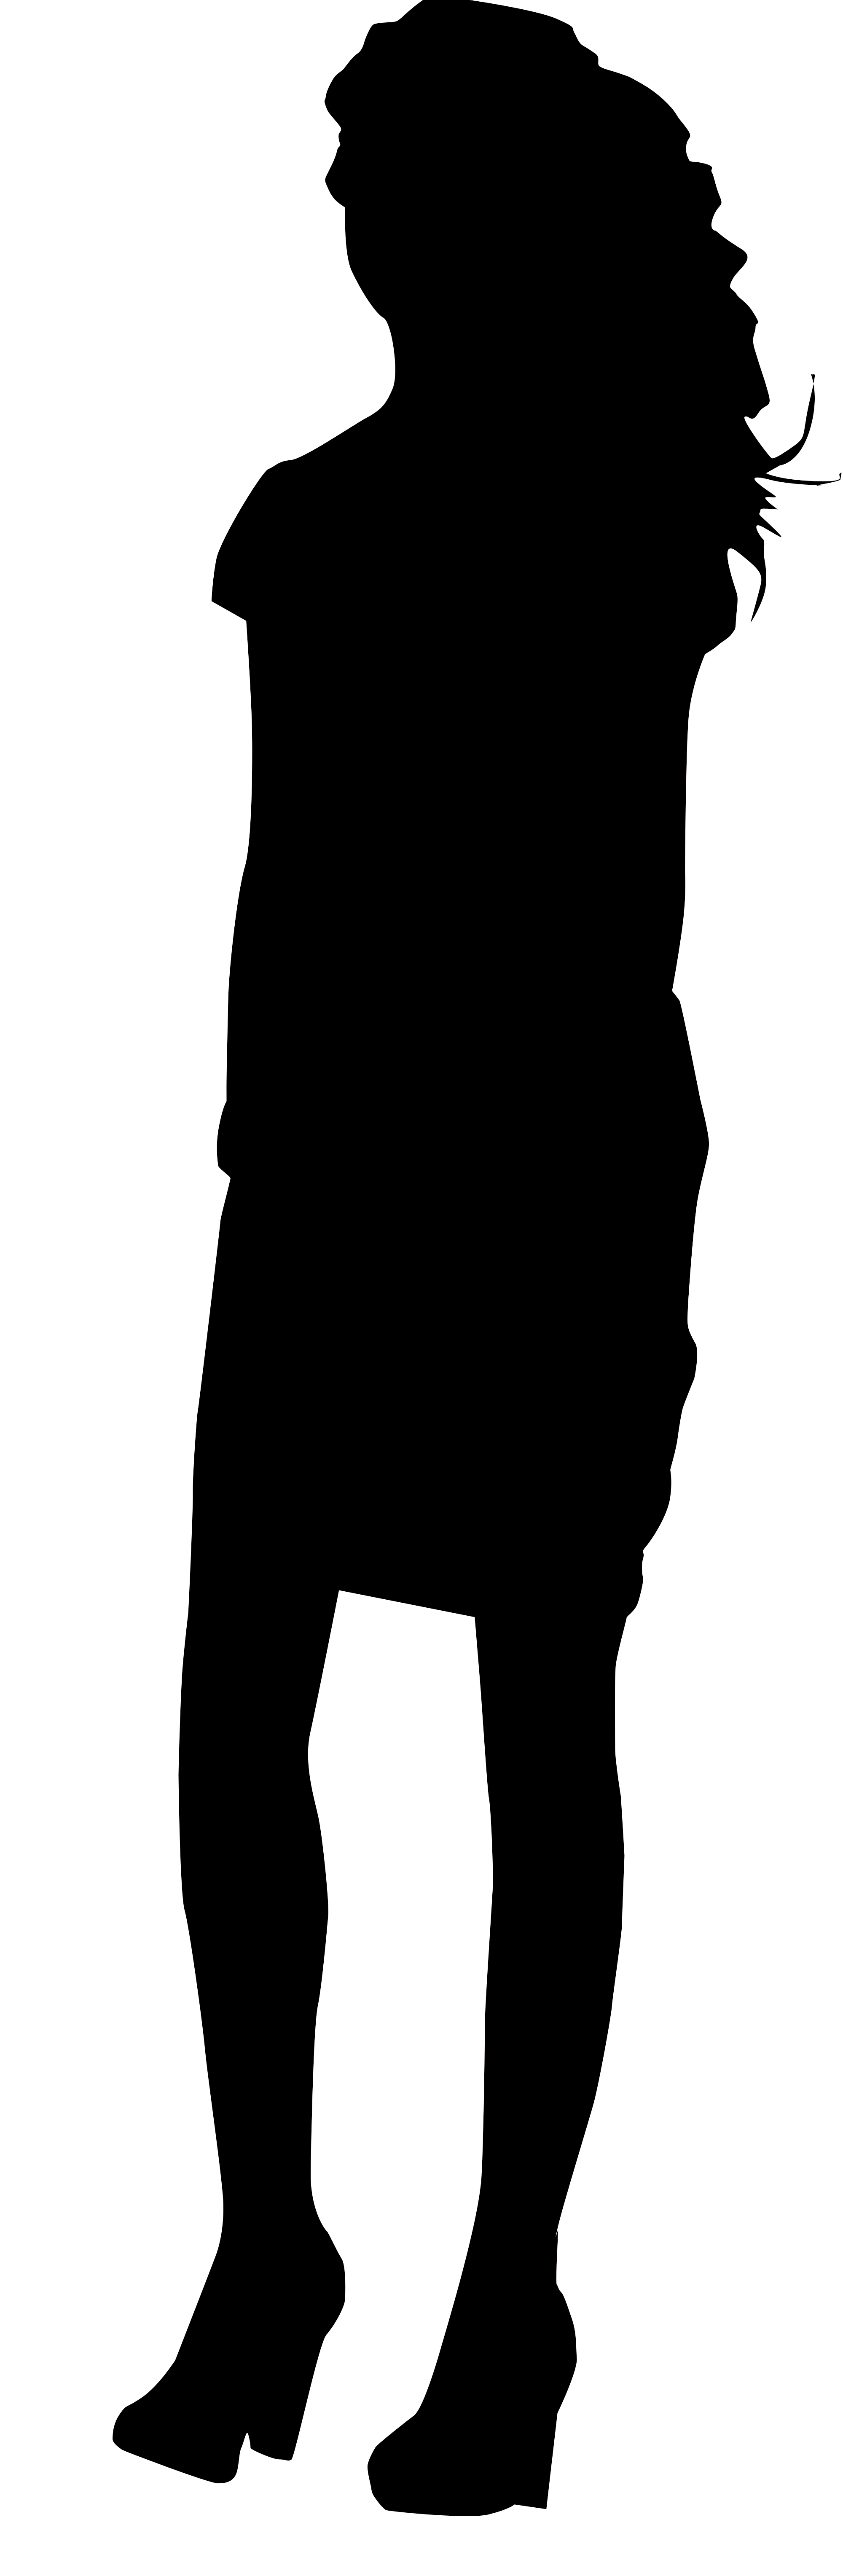 Lady standing silhouette clipart